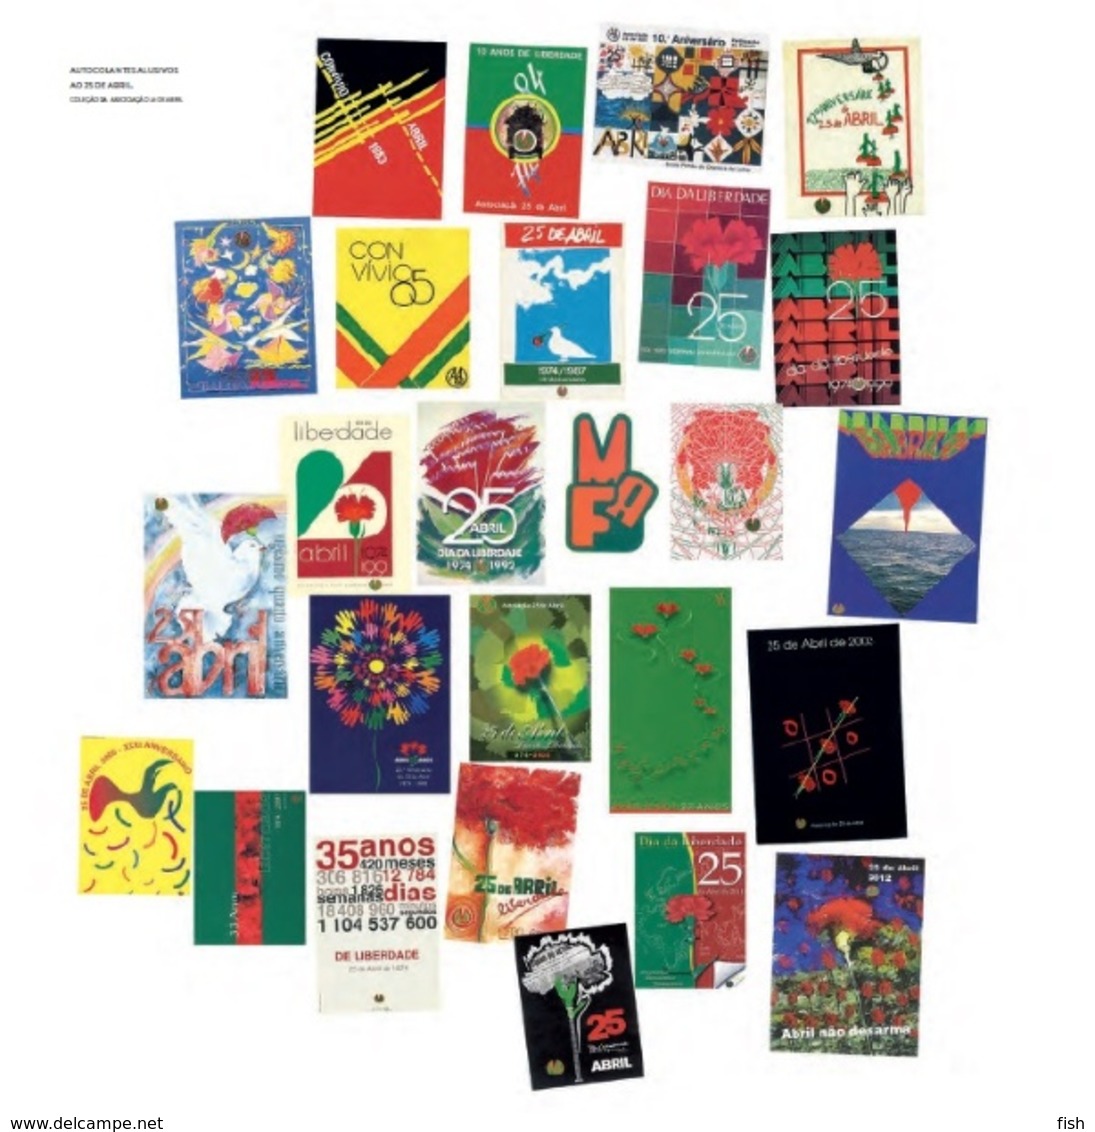 Portugal  ** & Thematic Book With Stamps, Book 25 April - 40 Years 2014 (5777) - Libro Del Año